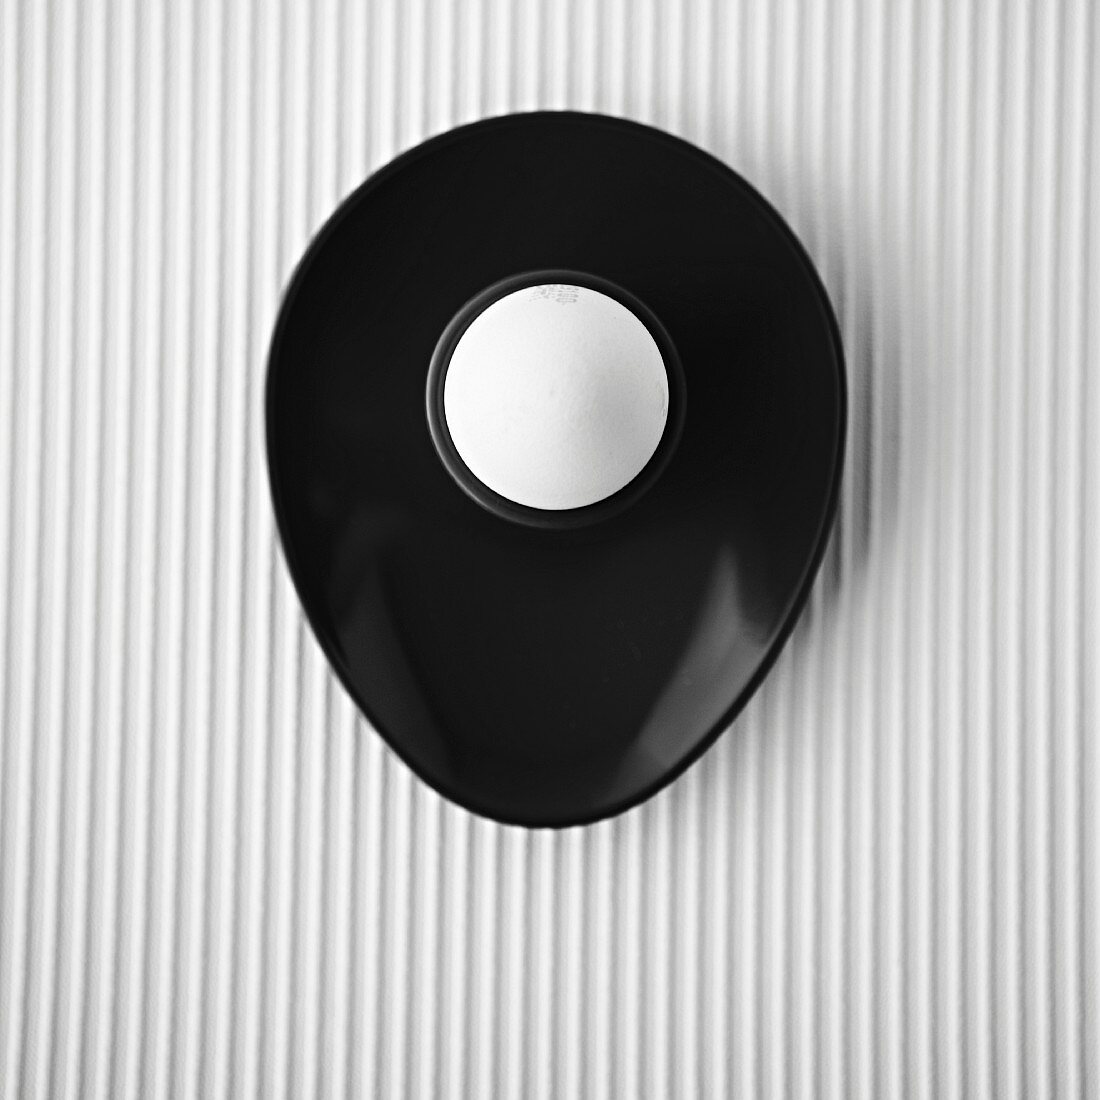 A white egg in a black egg cup, overhead, on a white textured background